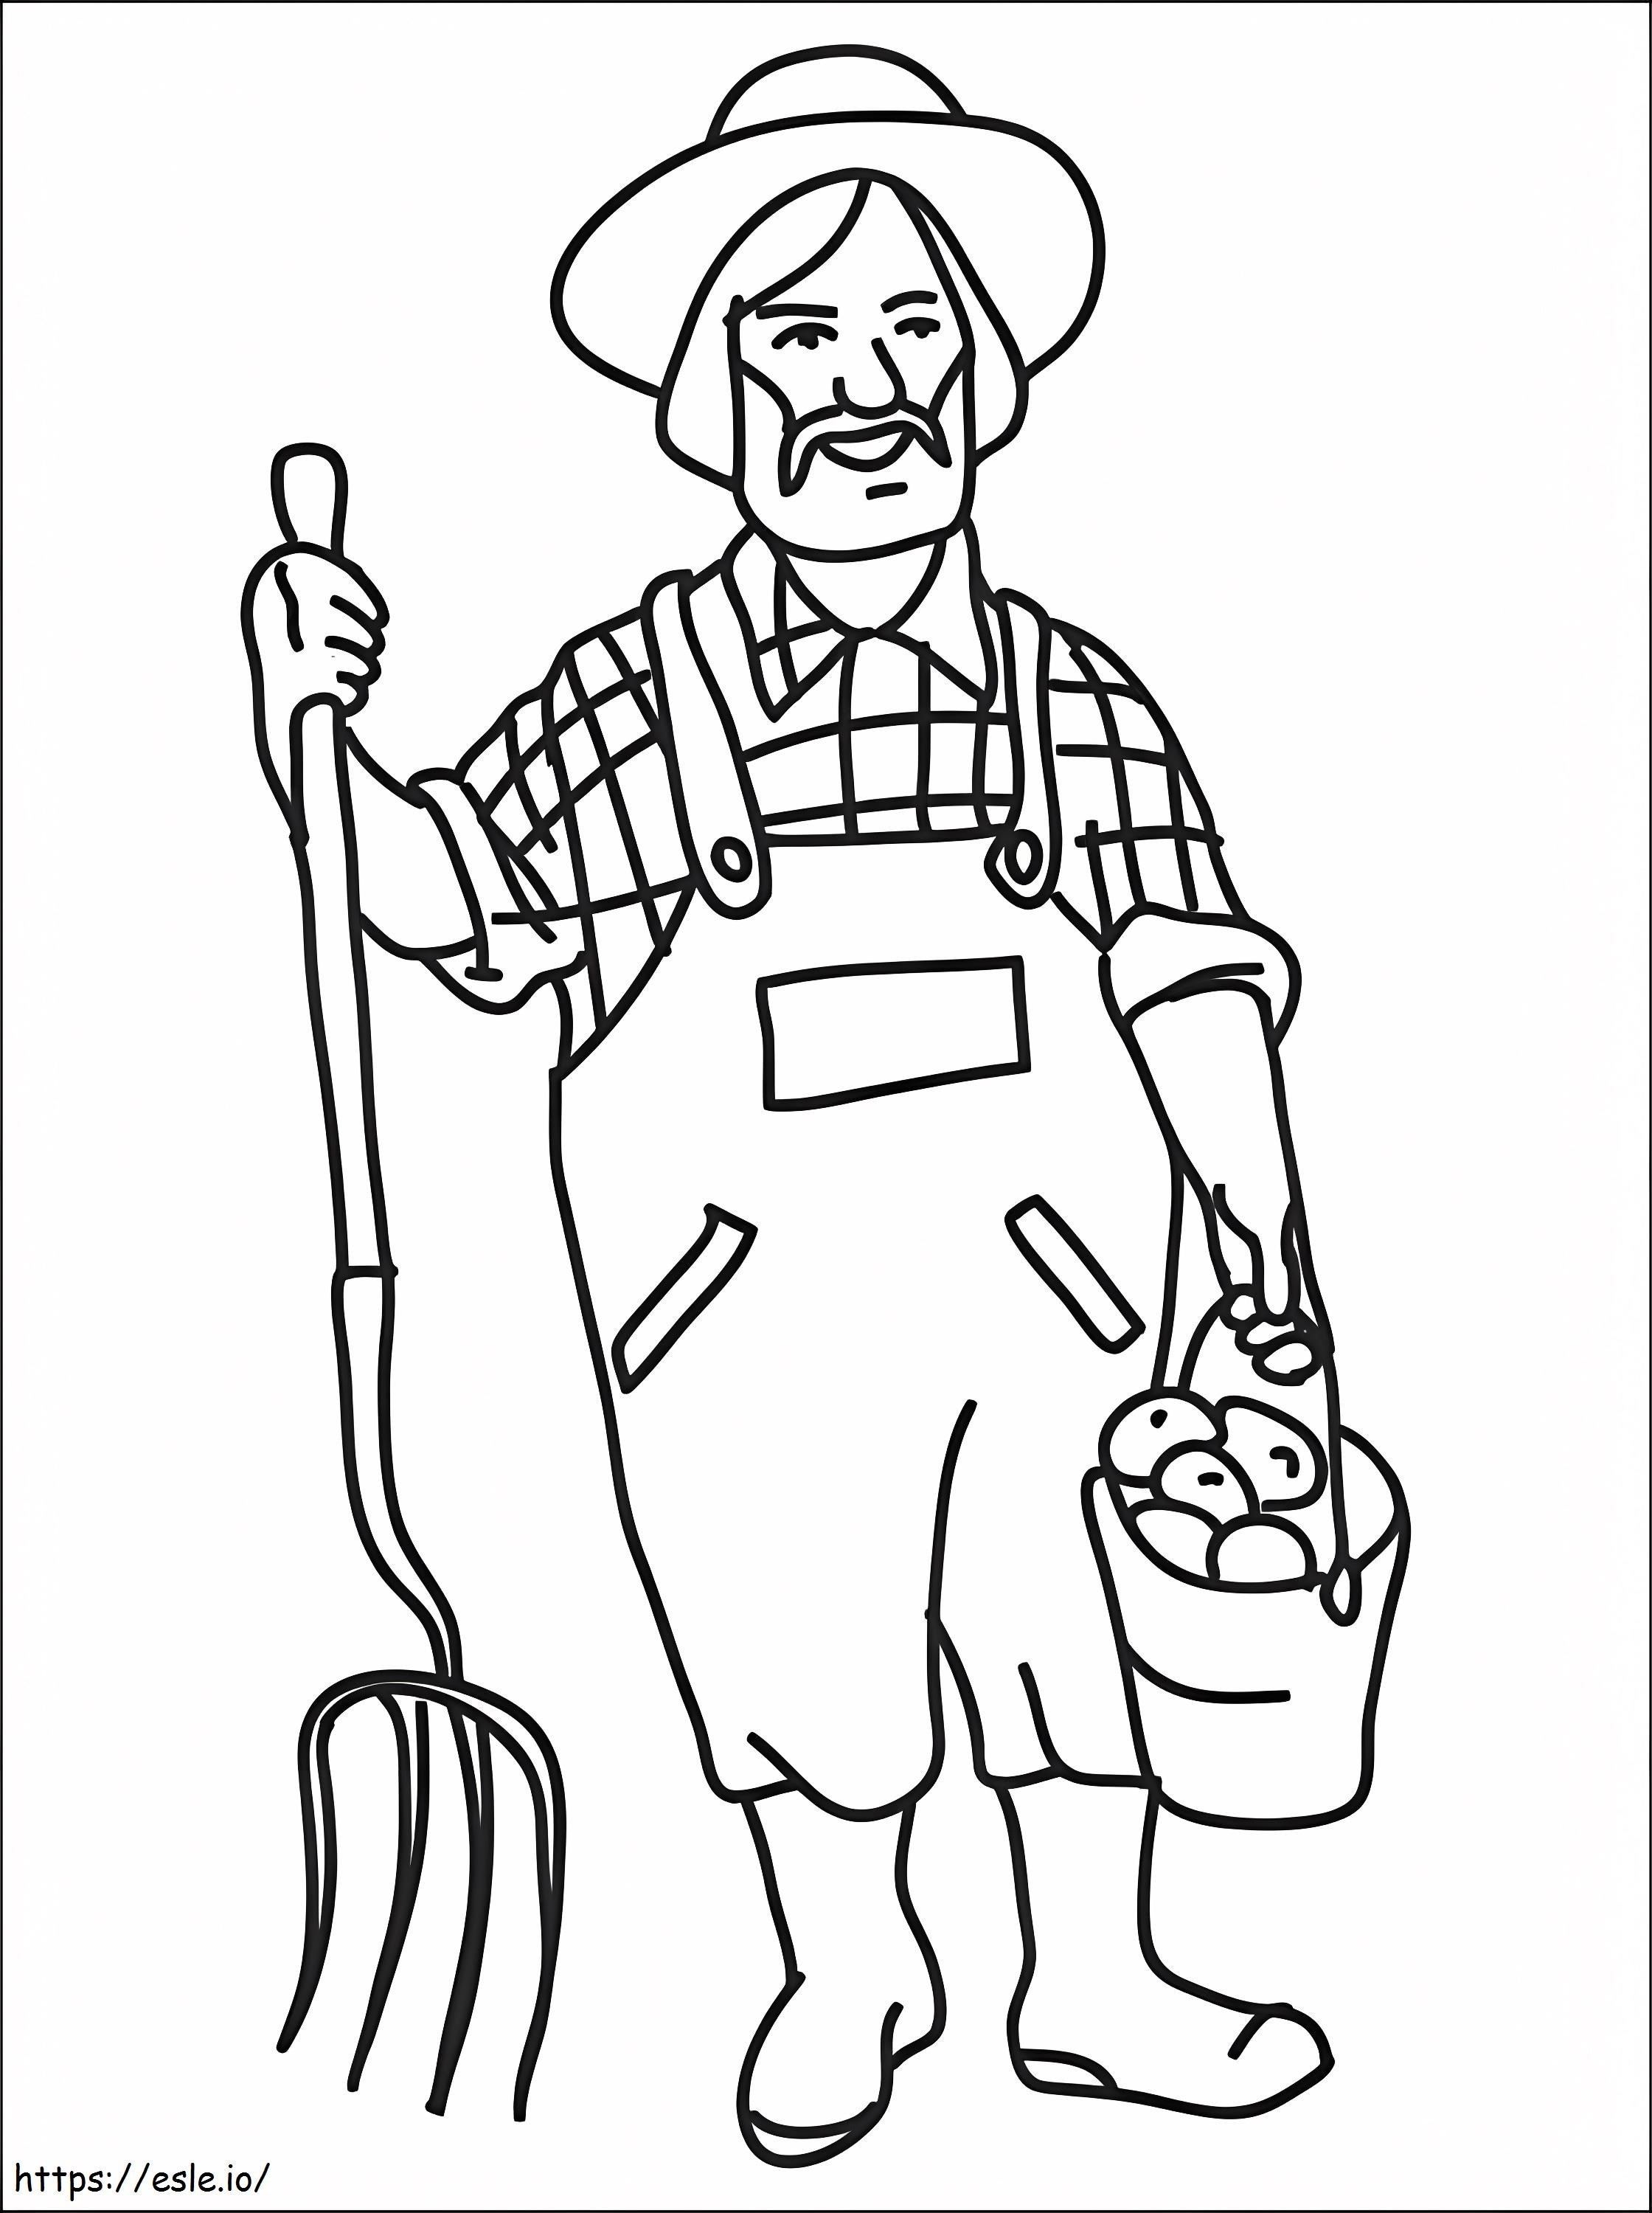 Old Farmer coloring page